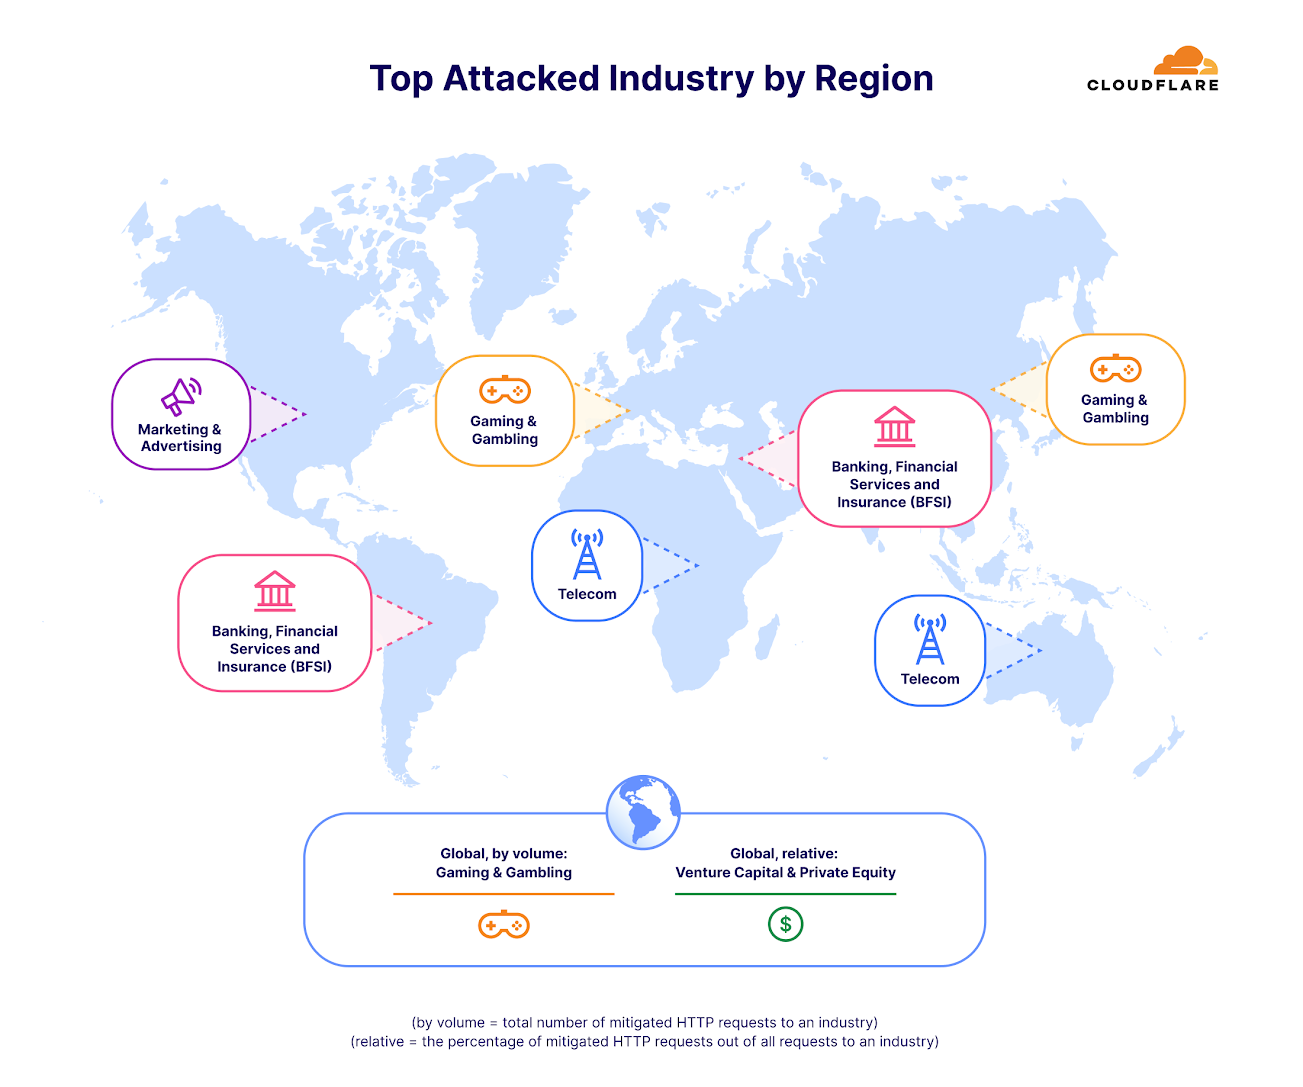 Top attacked industries by region (HTTP DDoS attacks)